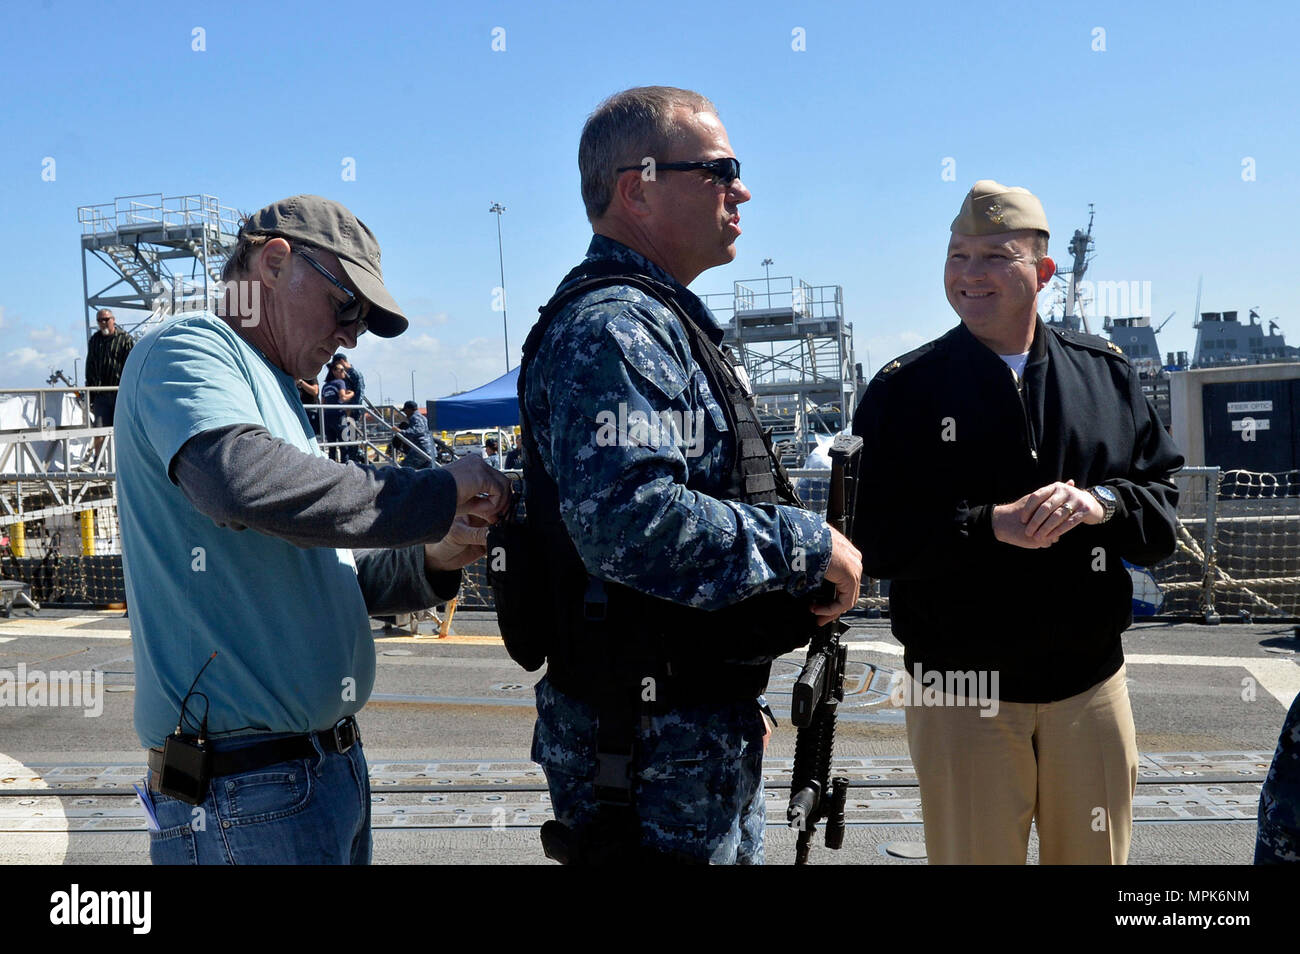 170323-N-IE405-230 SAN DIEGO (March 23, 2017) Naval Base San Diego Command Master Chief Matt Ruane explains the history of the California naval base to actor Adam Baldwin prior to the filming of the television show 'The Last Ship'. (U.S. Navy photo by Mass Communication Specialist 2nd Class Indra Bosko/Released) Stock Photo